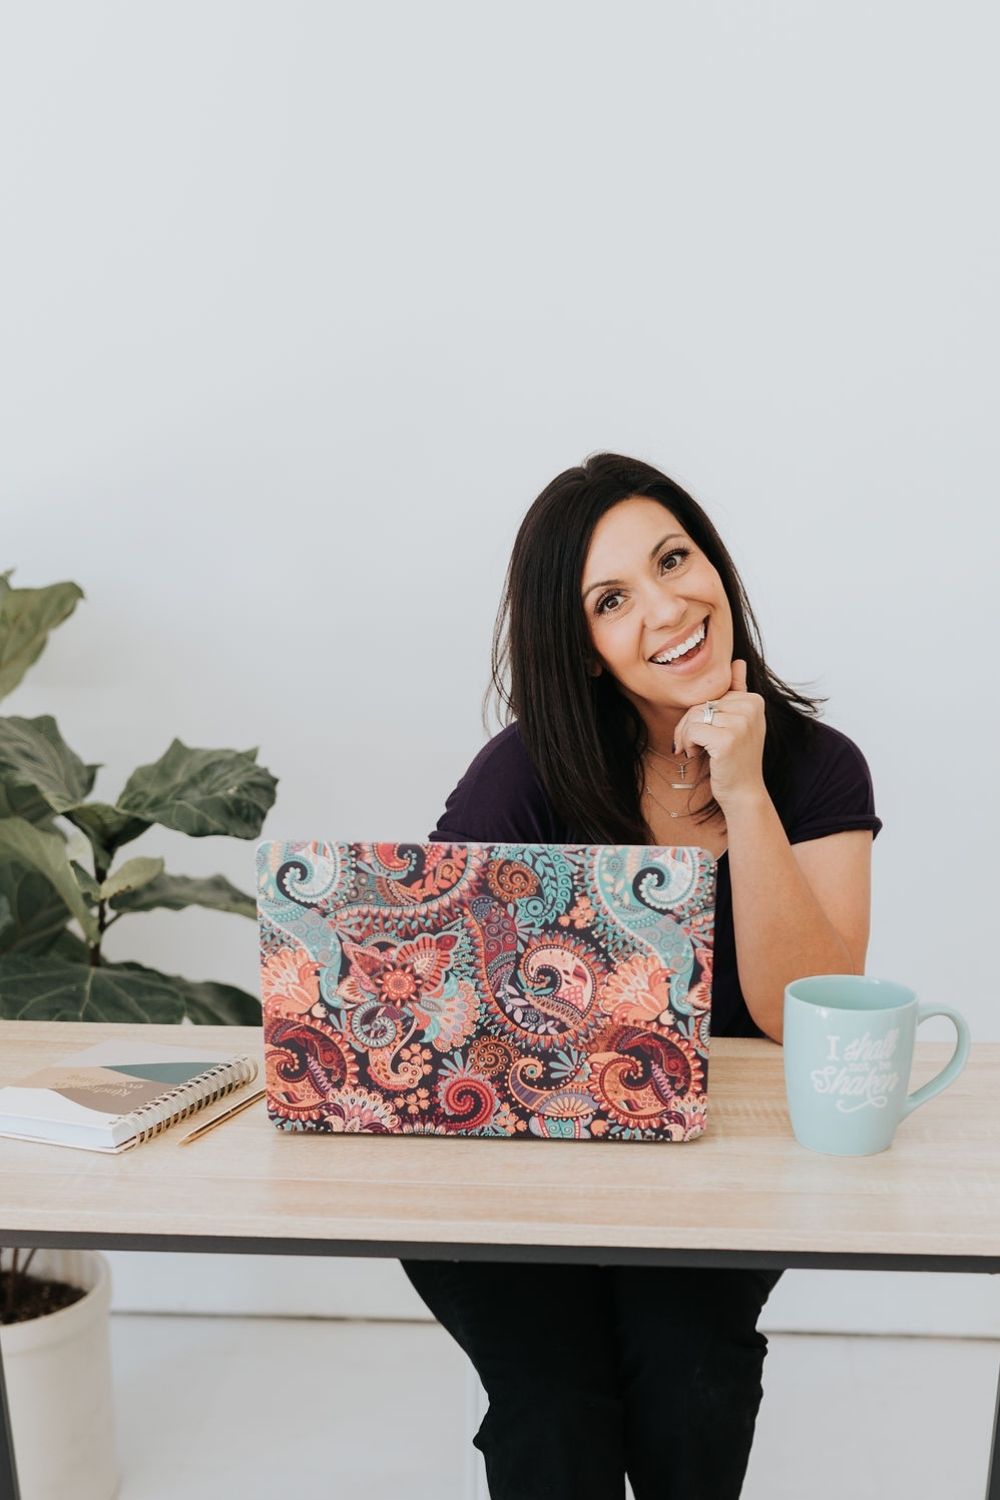 dark haired lady sitting at a desk with her chin resting on her left hand smiling into the camera. To her right is a house plant and on the desk in front of her is a laptop, a coffee cup and a notebook and pen.